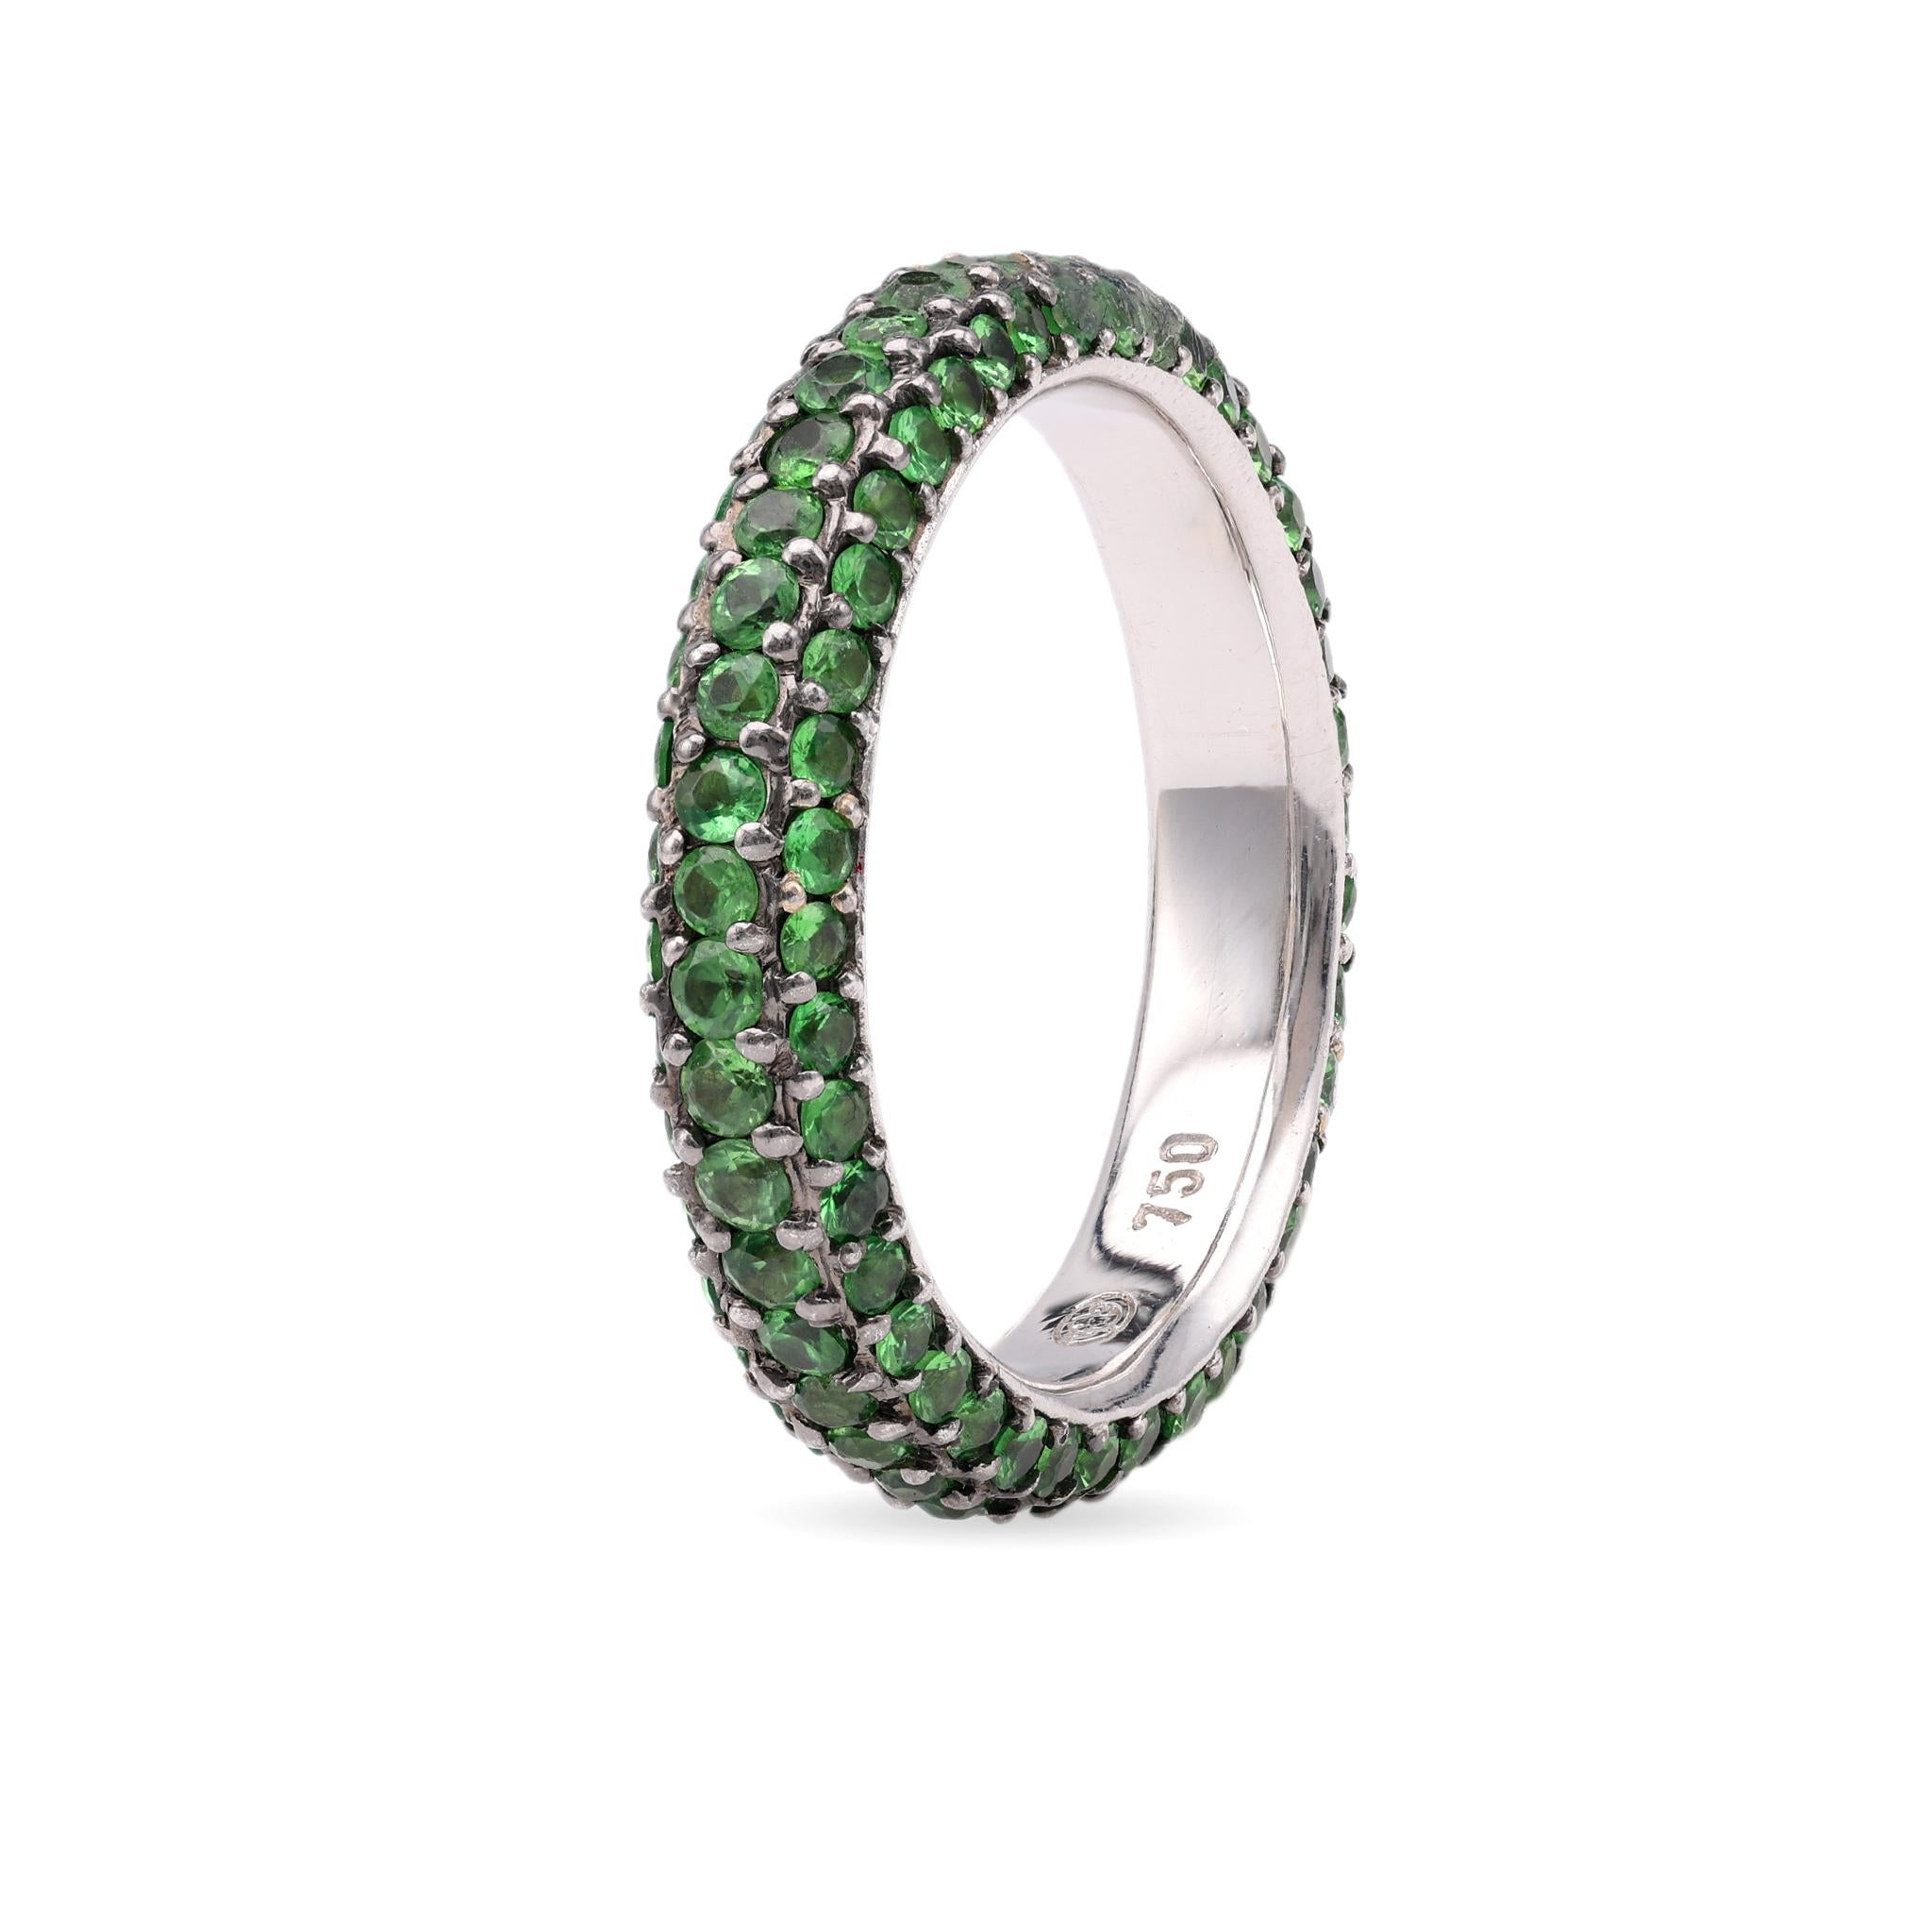 Vintage Tsavorite Garnet 18k White Gold Eternity Band In Excellent Condition For Sale In Beverly Hills, CA